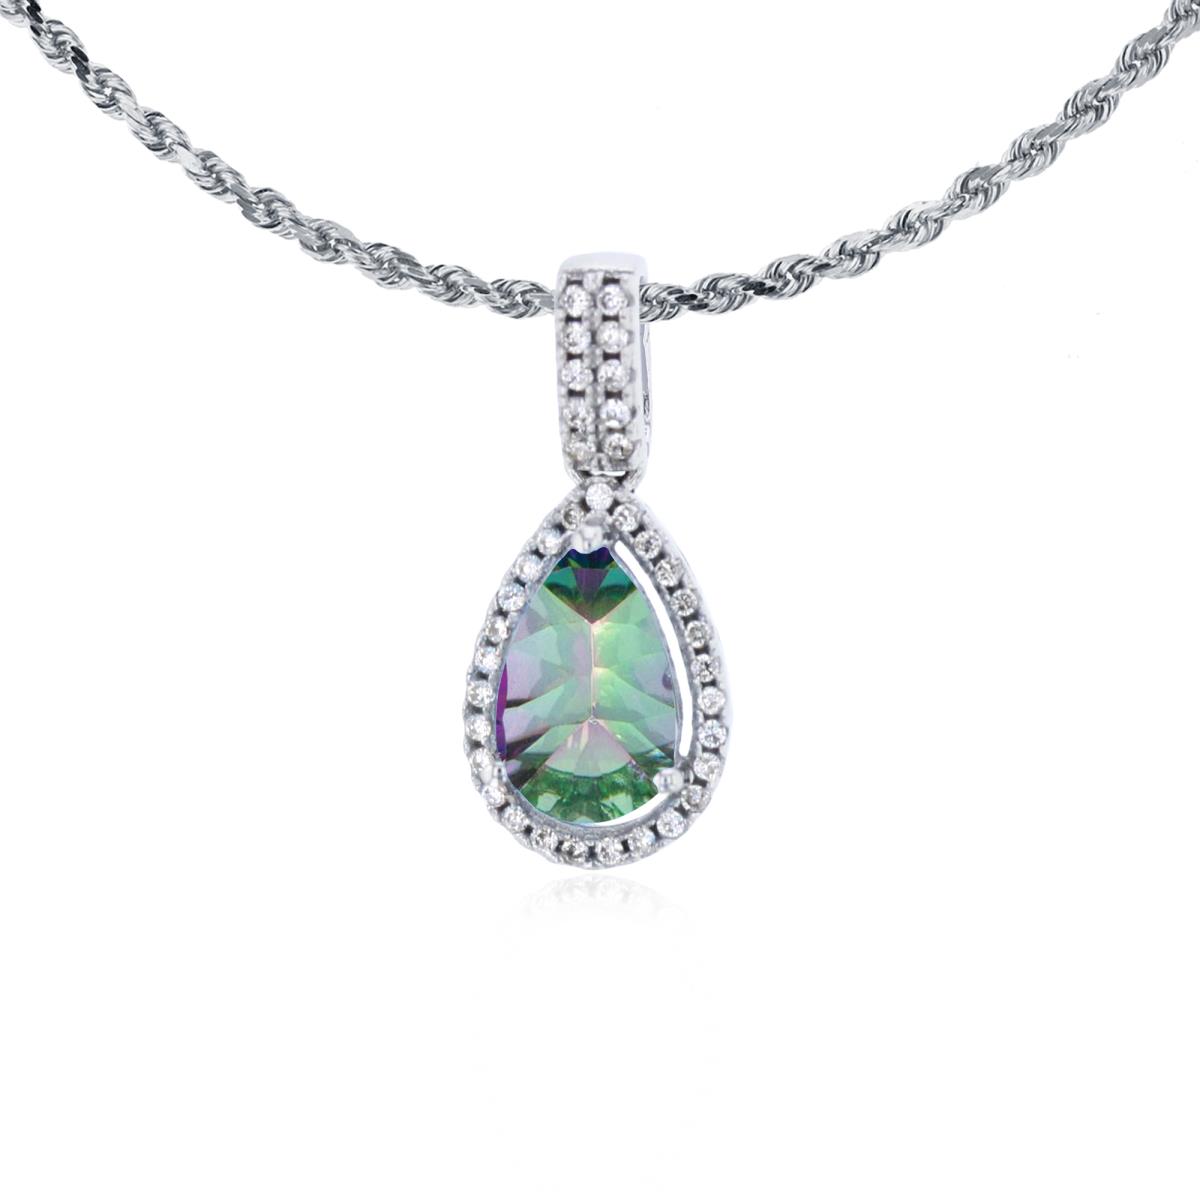 10K White Gold 8x5mm Pear Cut Mystic Green Topaz & 0.11 CTTW Diamond Halo 18" Rope Chain Necklace